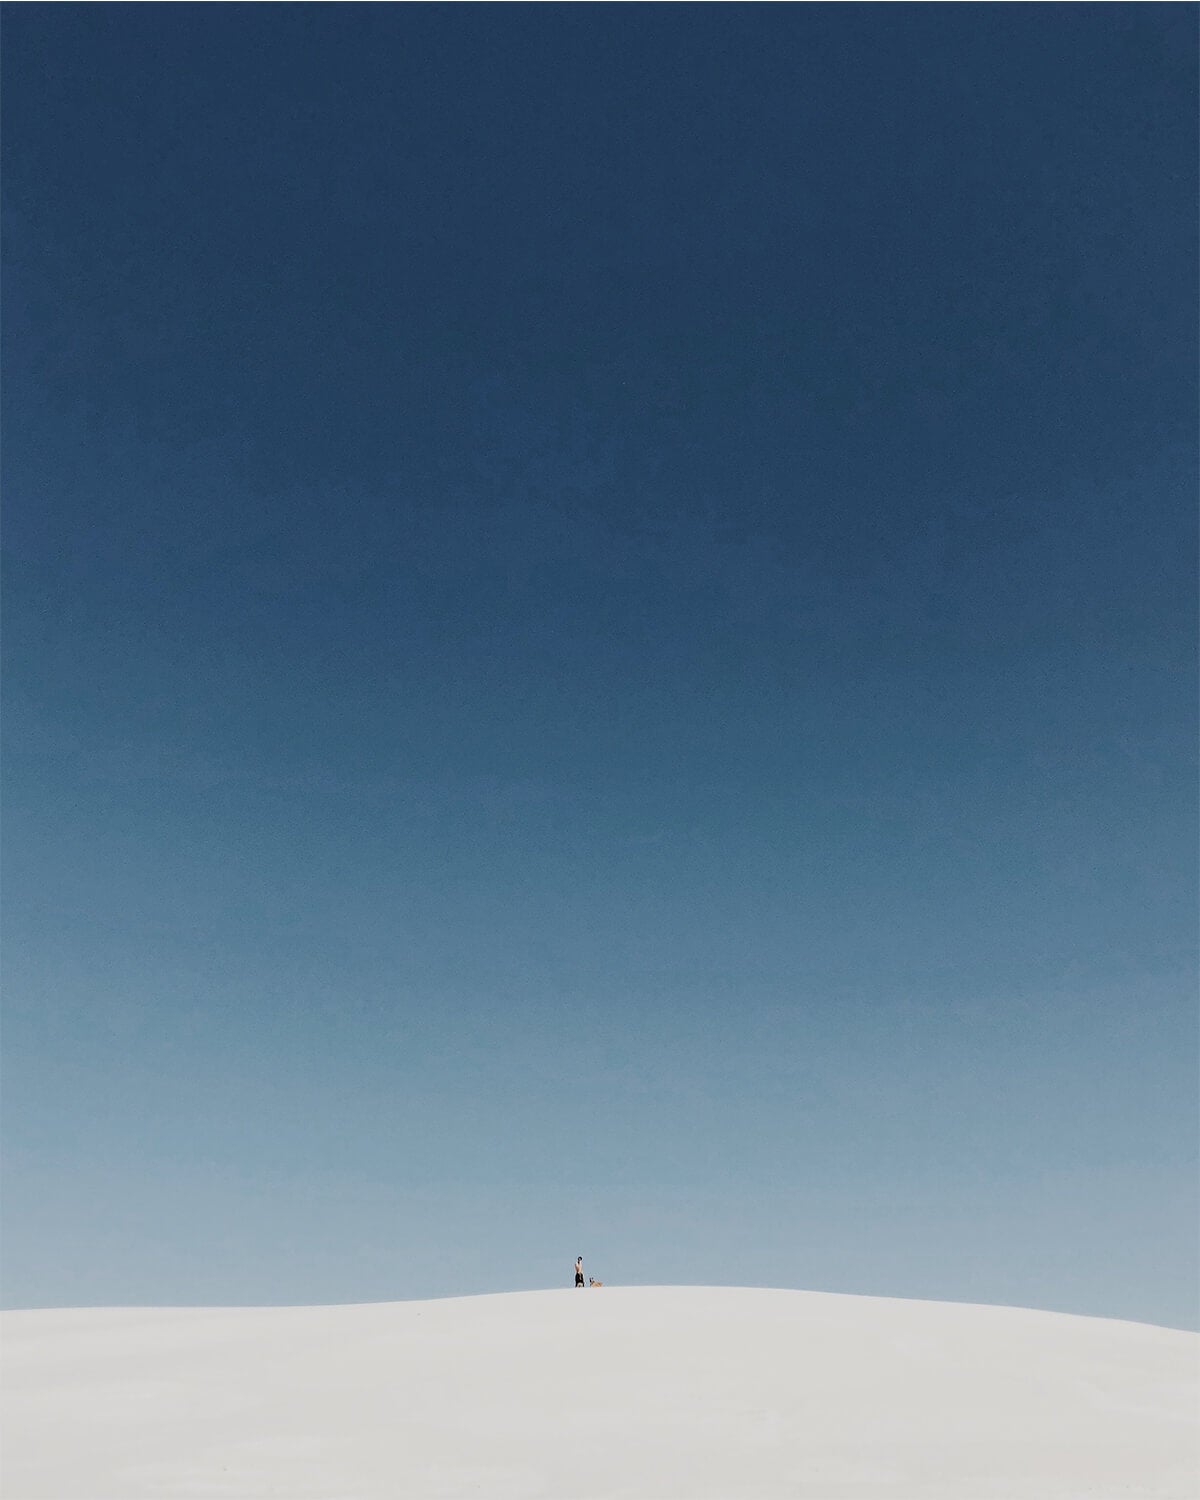 Man and dog standing on top of New Mexico sand dune